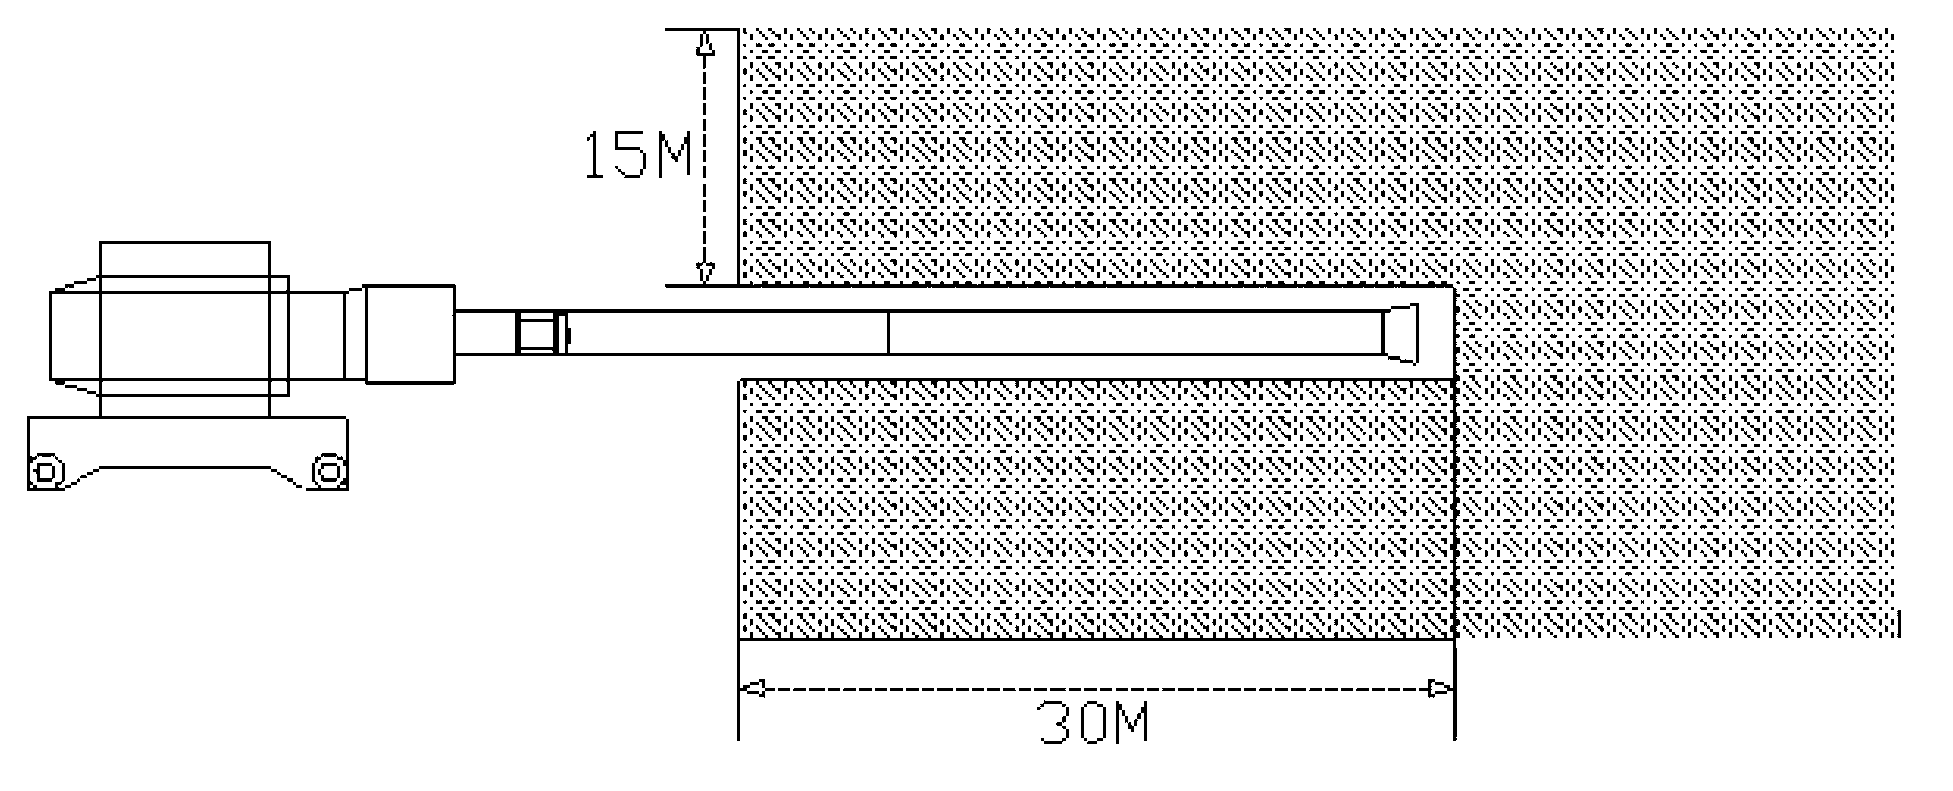 Advanced detection device and method for unfavorable geology and rock mass mechanical properties of deep and long tunnels